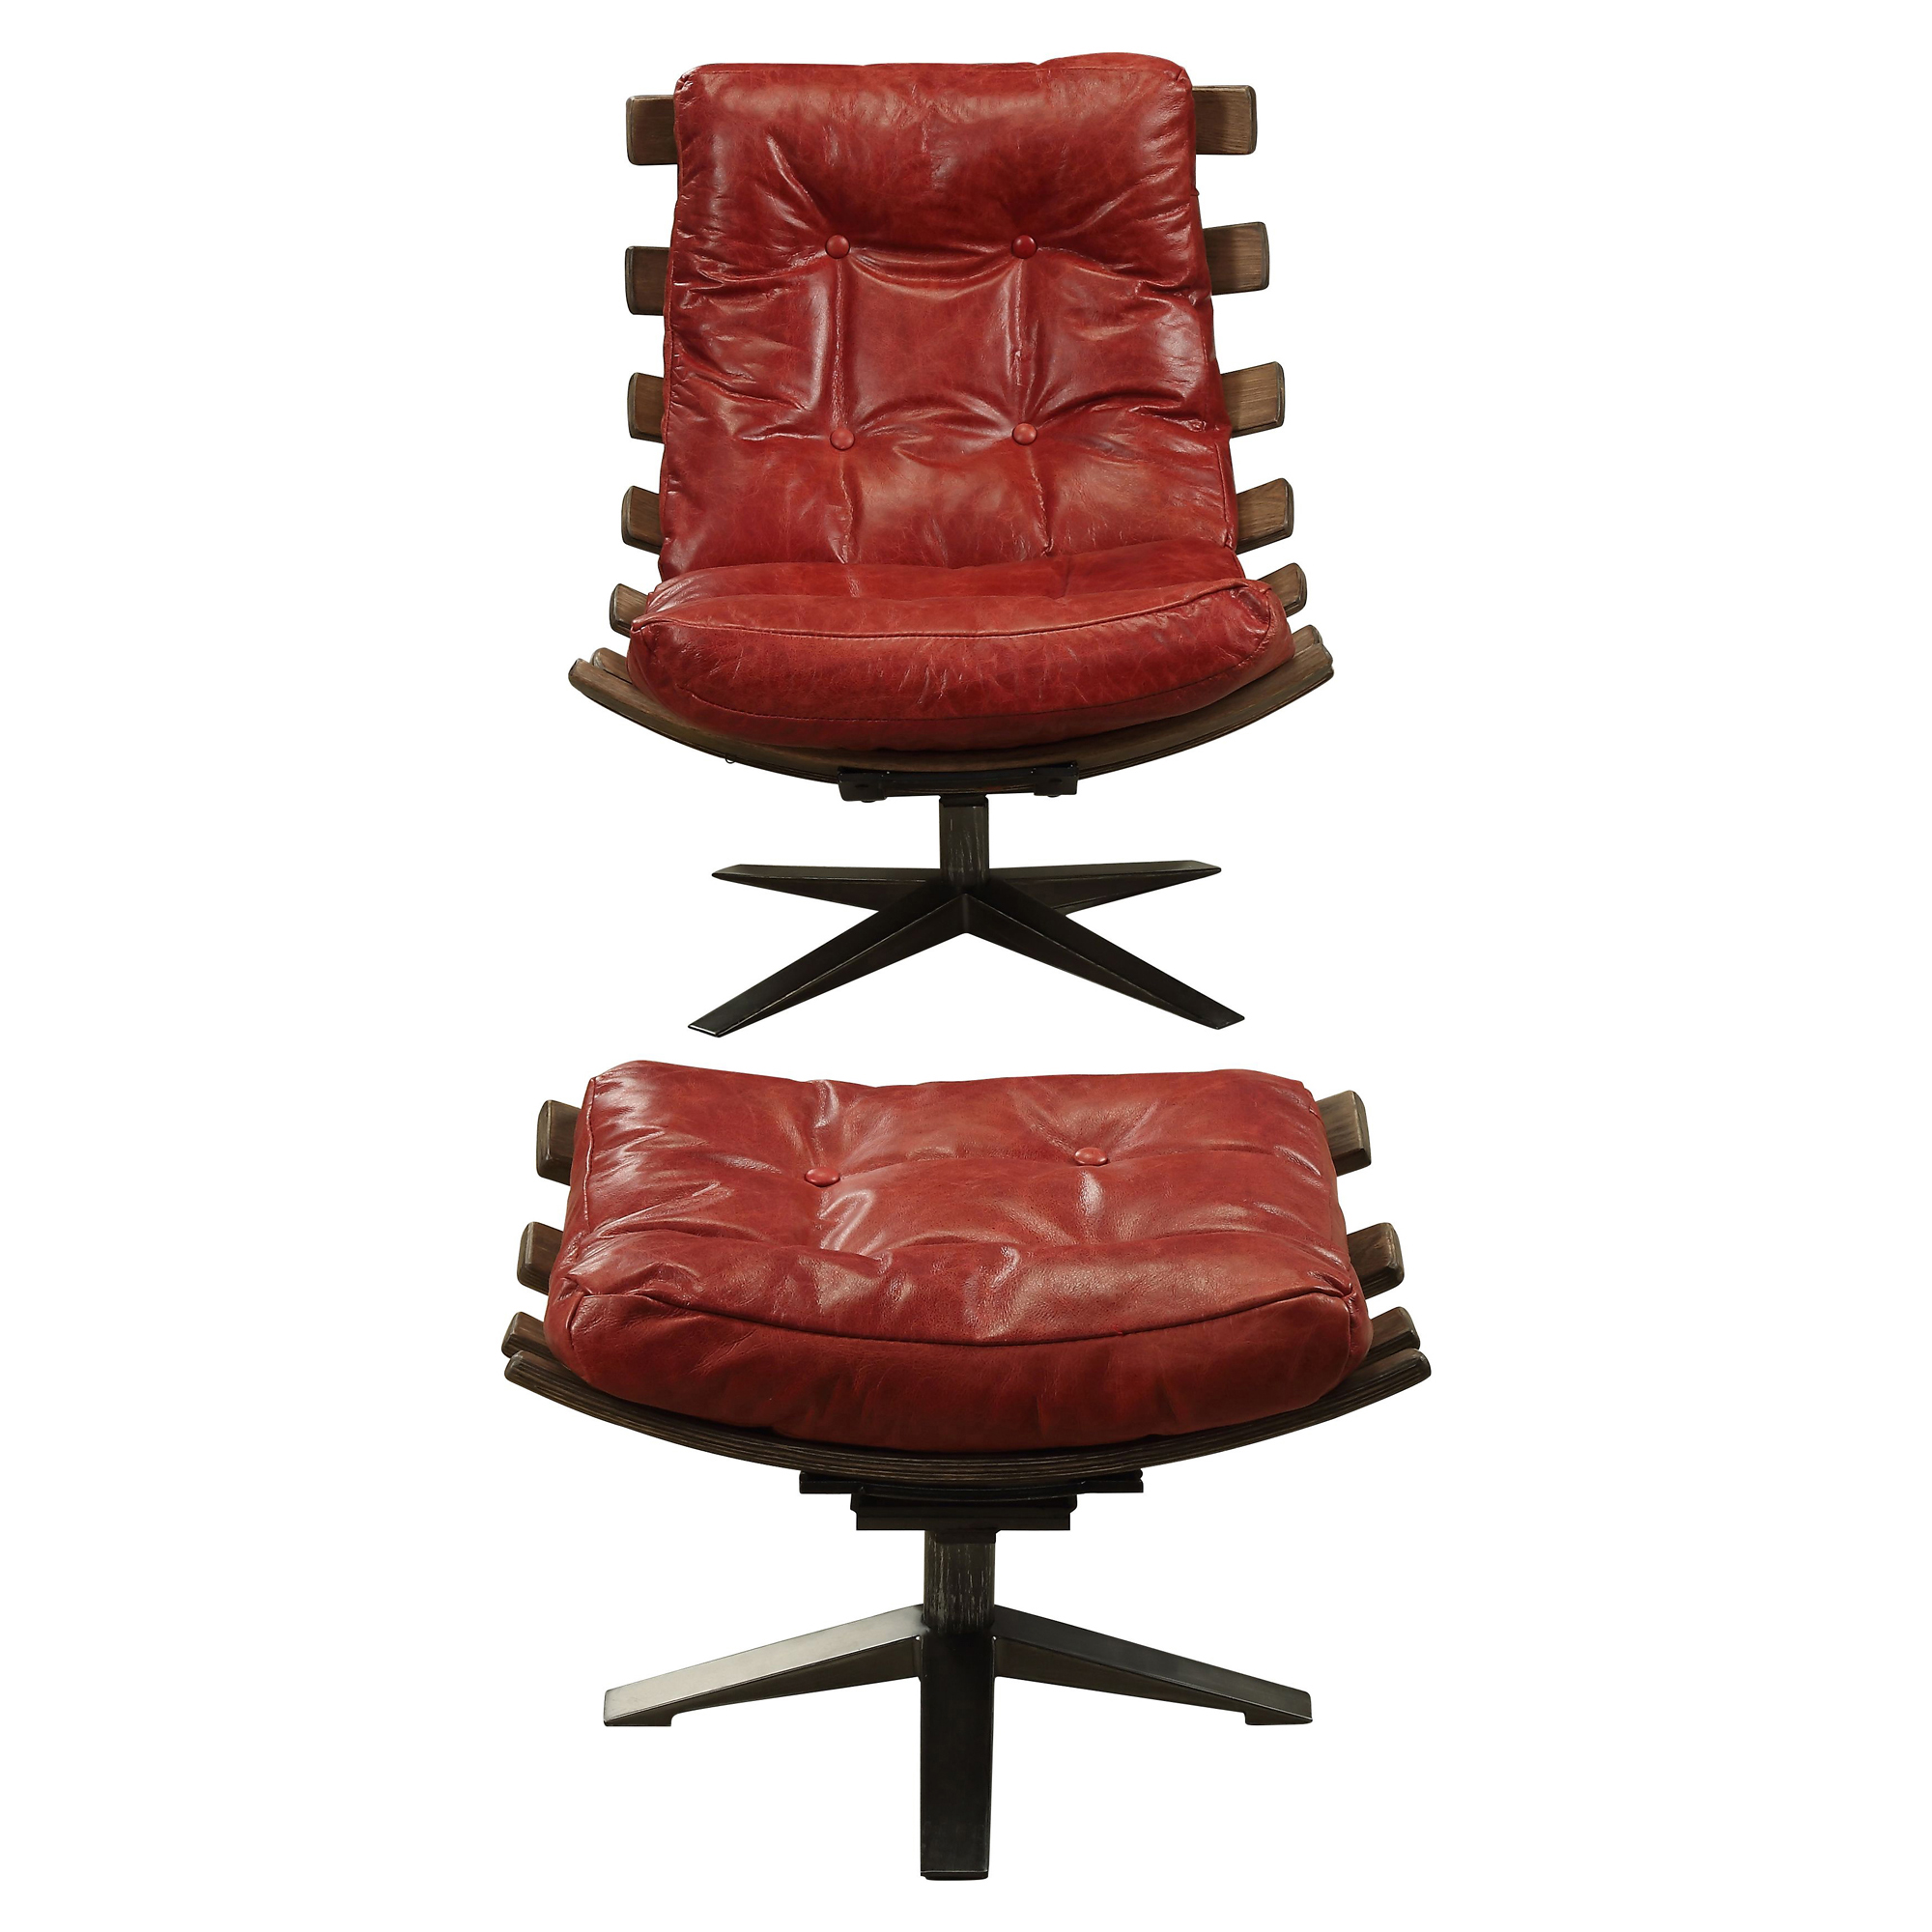 ACME Gandy 2-piece Chair and Ottoman Set in Antique Red and Brown - image 2 of 8